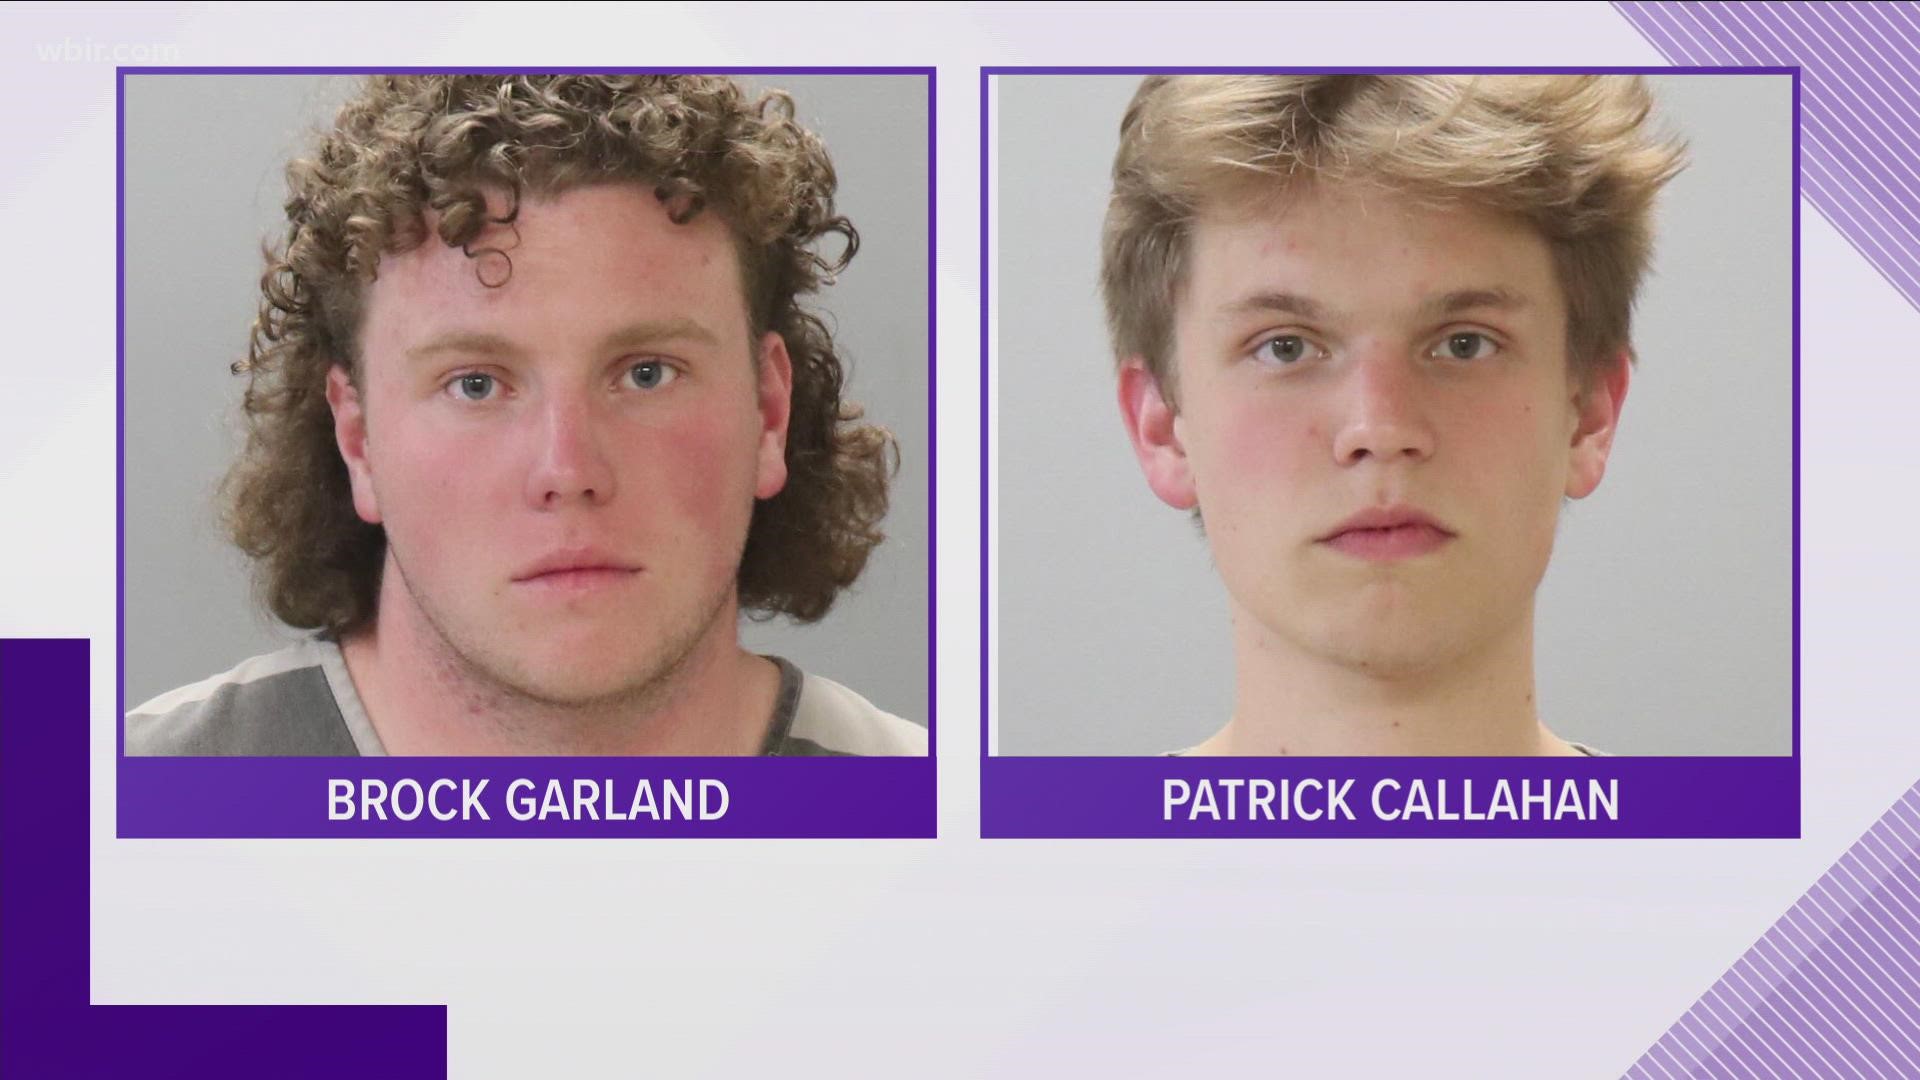 Patrick Callahan and Brock Garland were caught on camera vandalizing a food delivery robot, UTPD said.